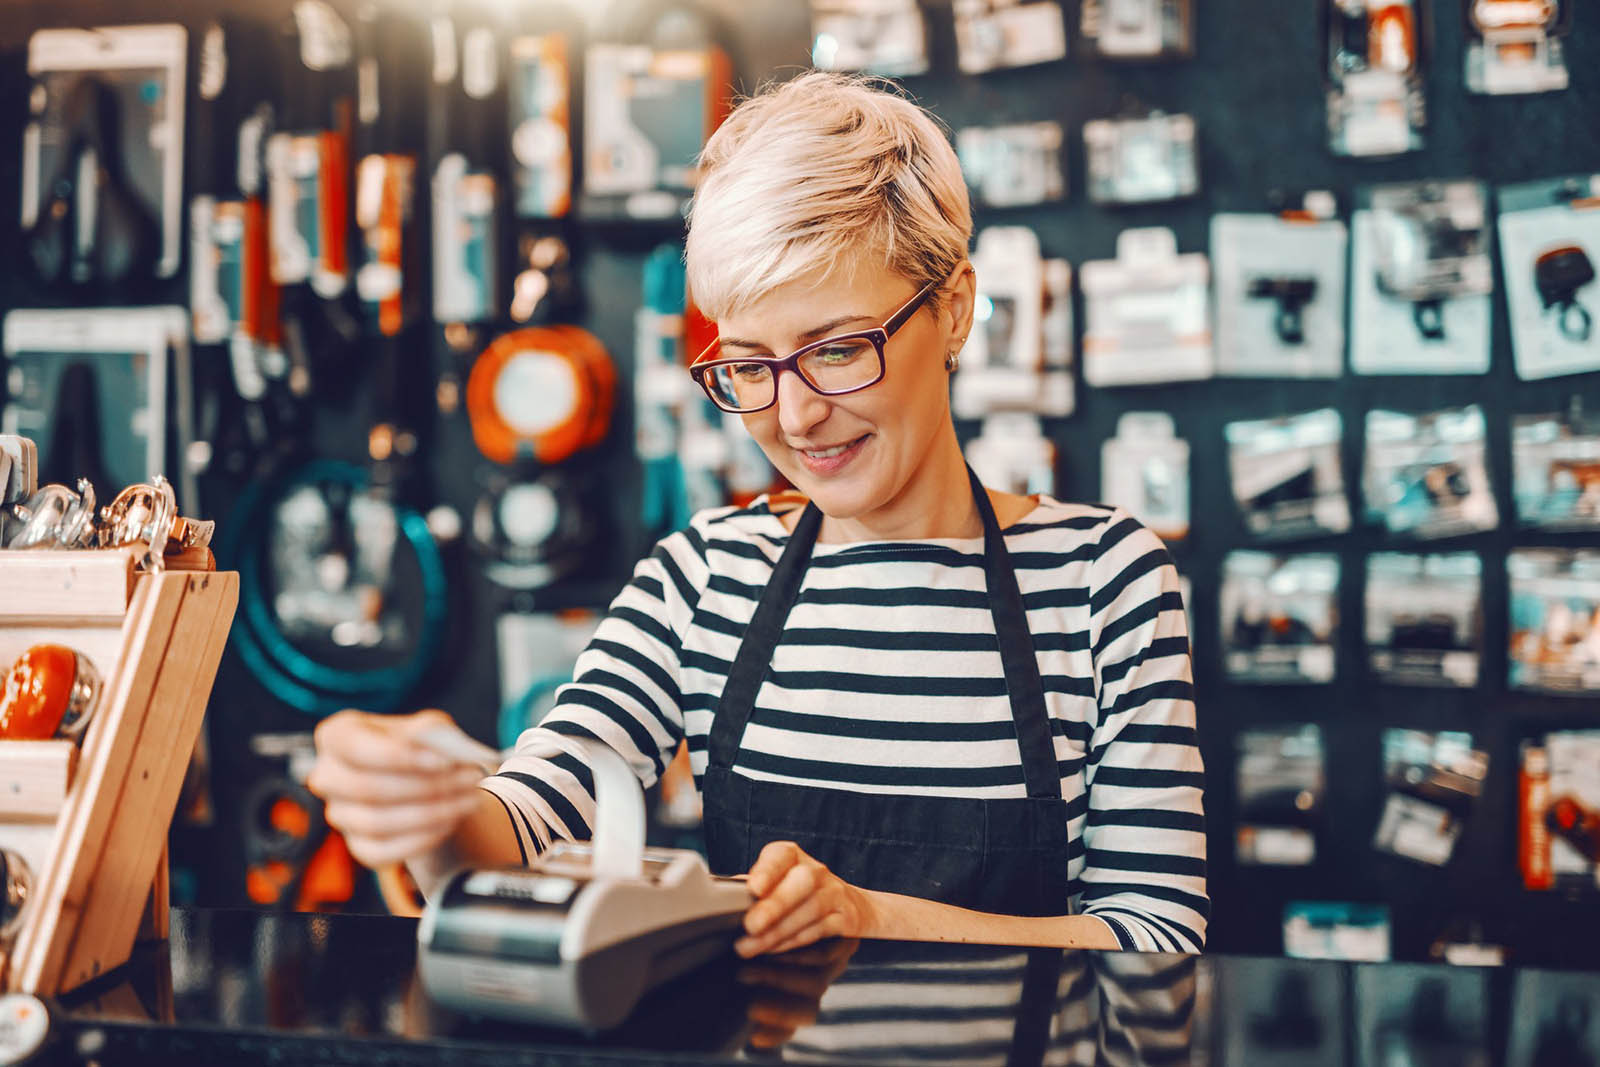 Middle School Spelling Quiz Woman In Apron Reaching For Receipt At Store Counter Small Business Owner